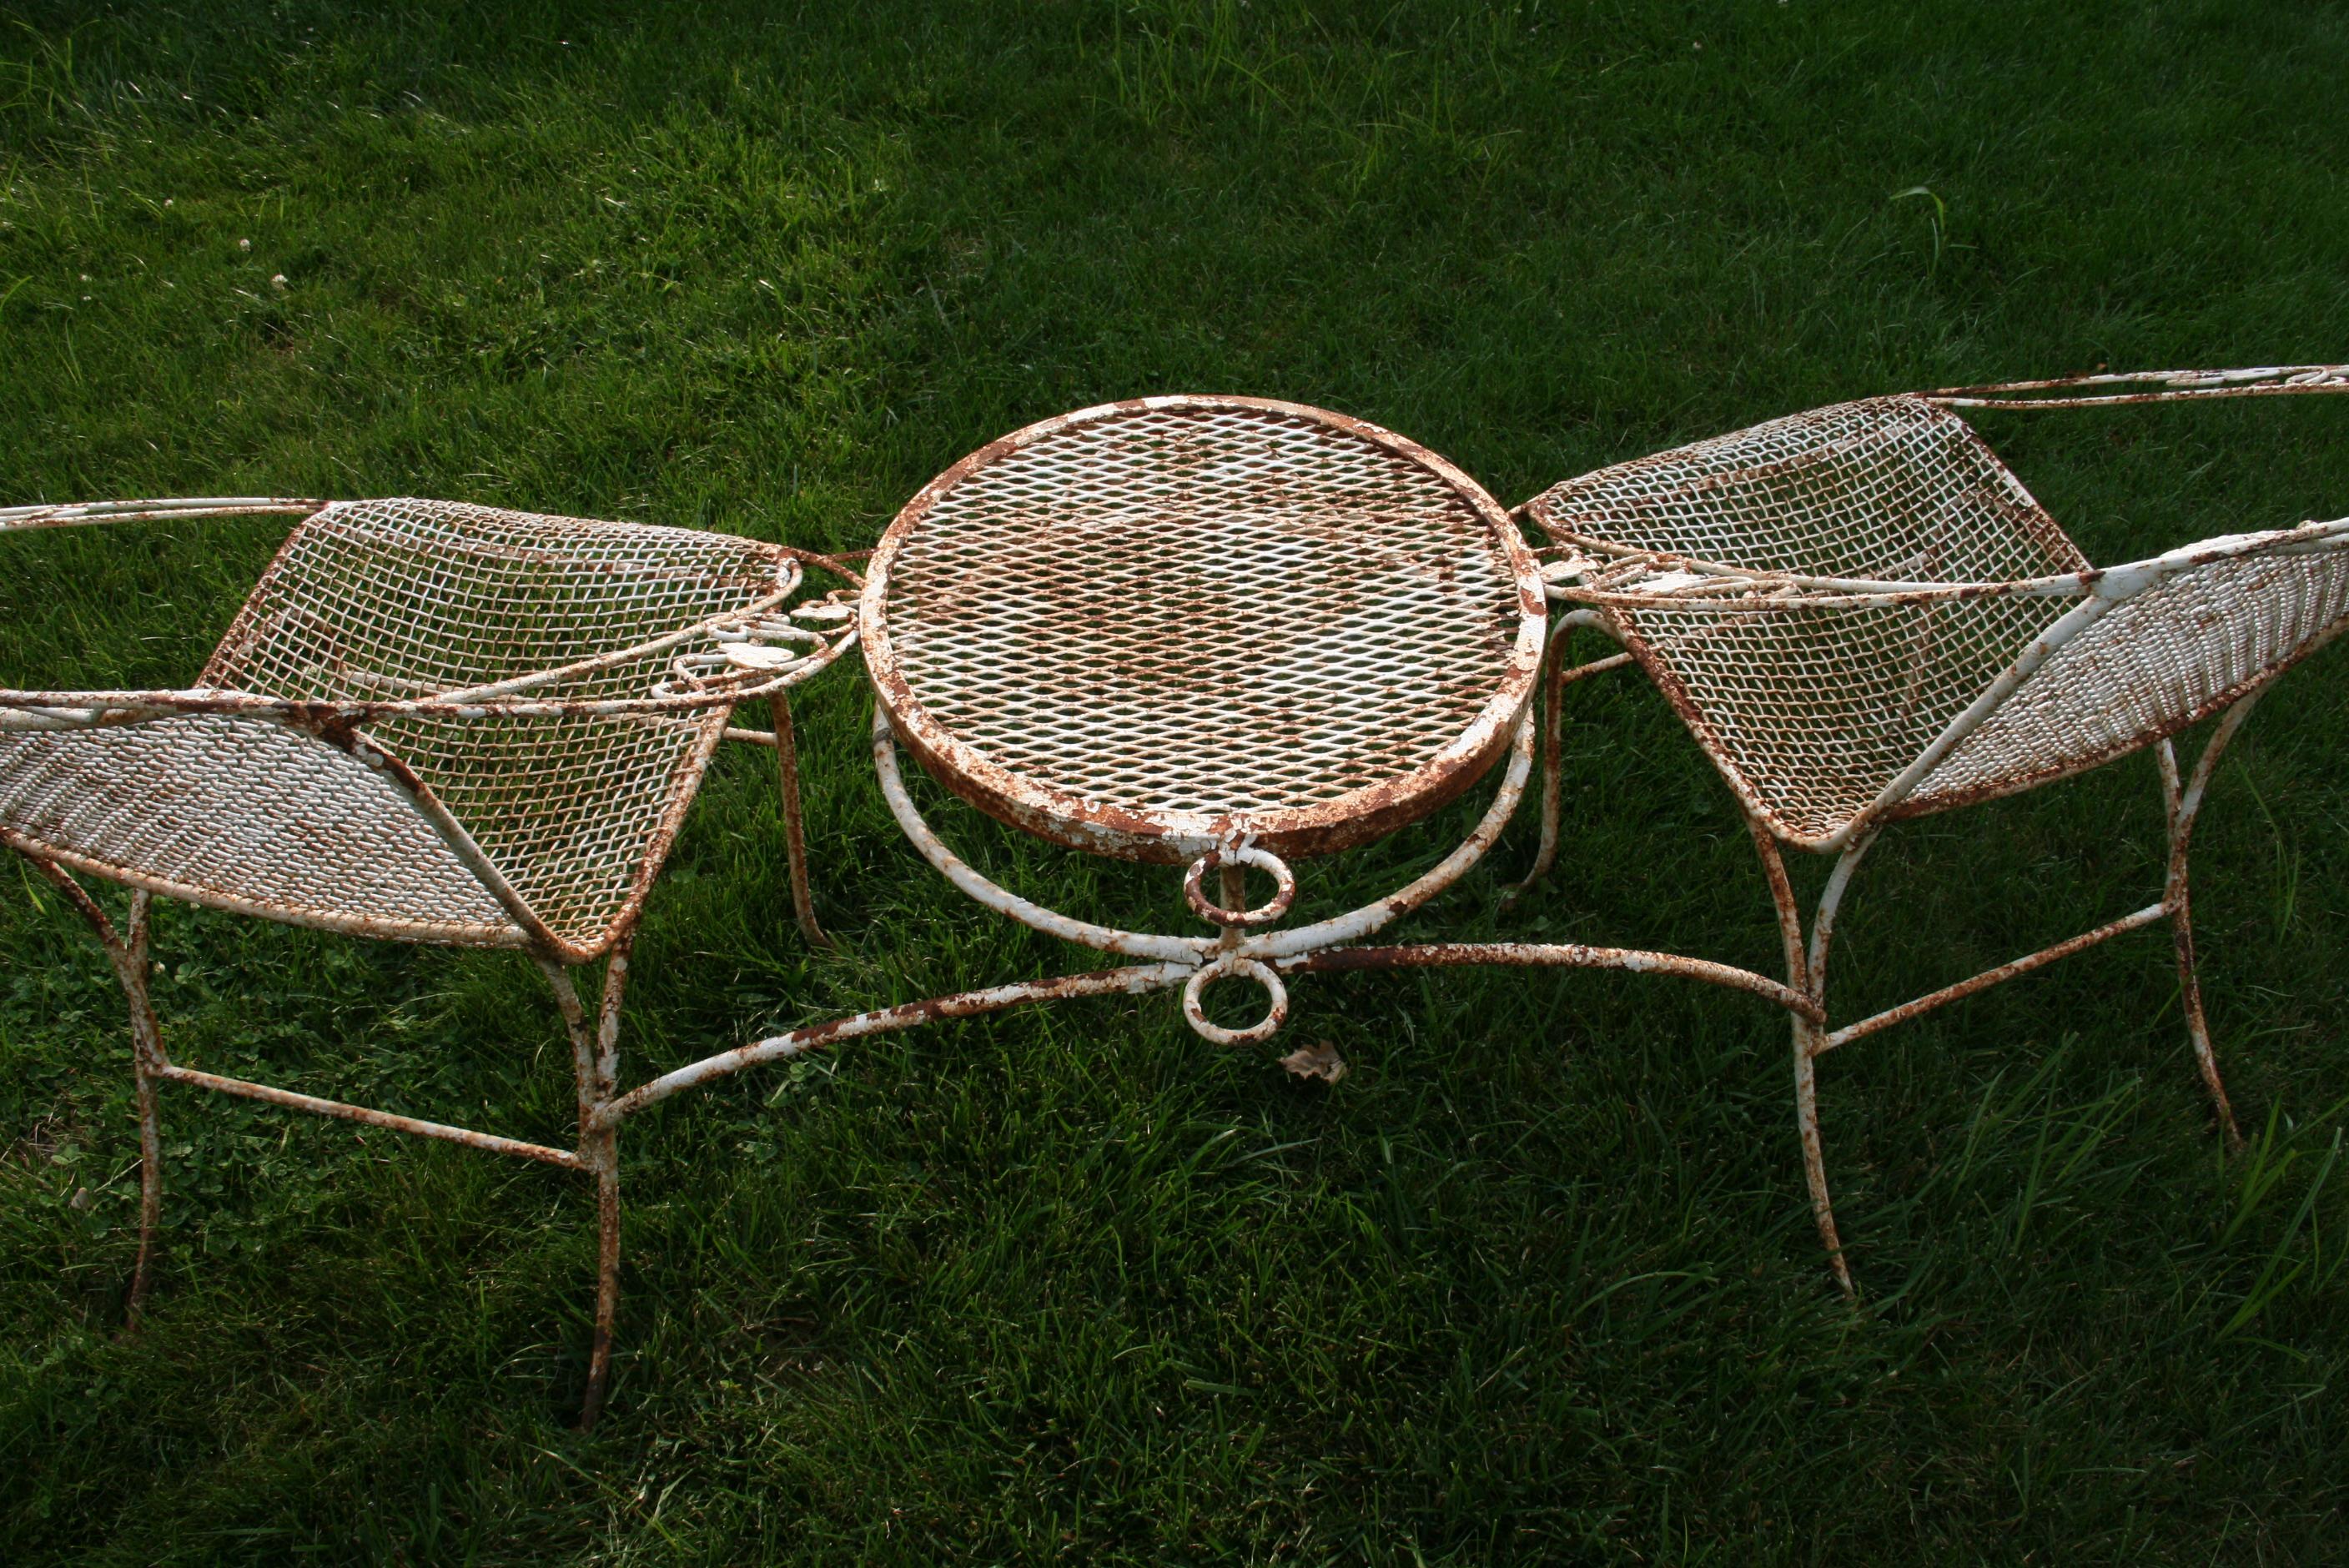 Mid-20th Century Garden Attached Double Seat and Table Garden Furniture by Saterini